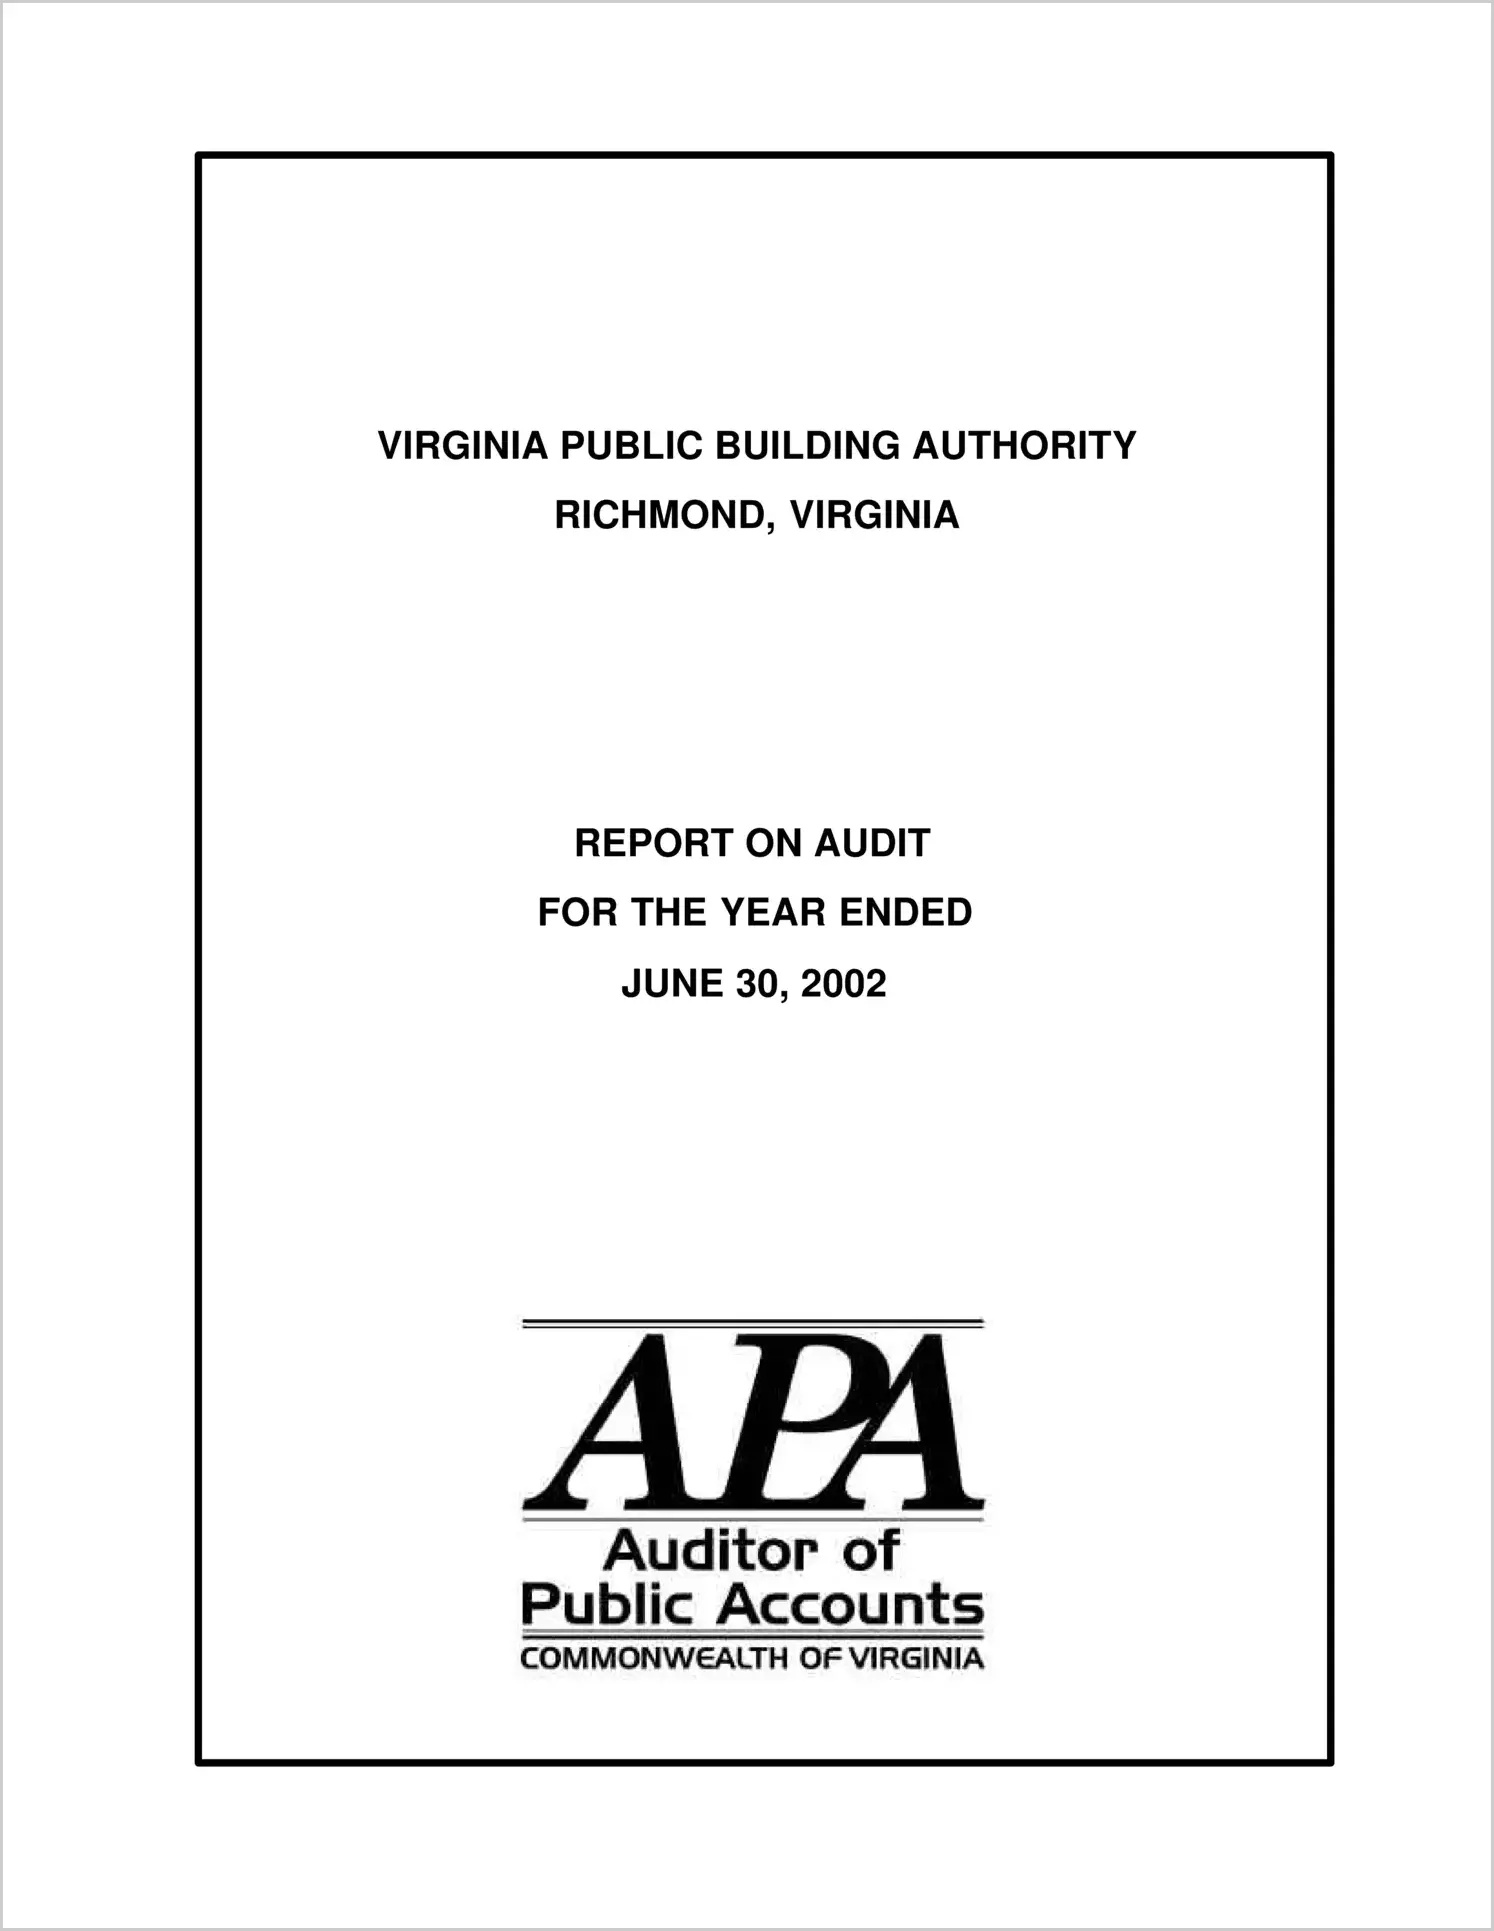 Virginia Public Building Authority for the year ended June 30, 2002